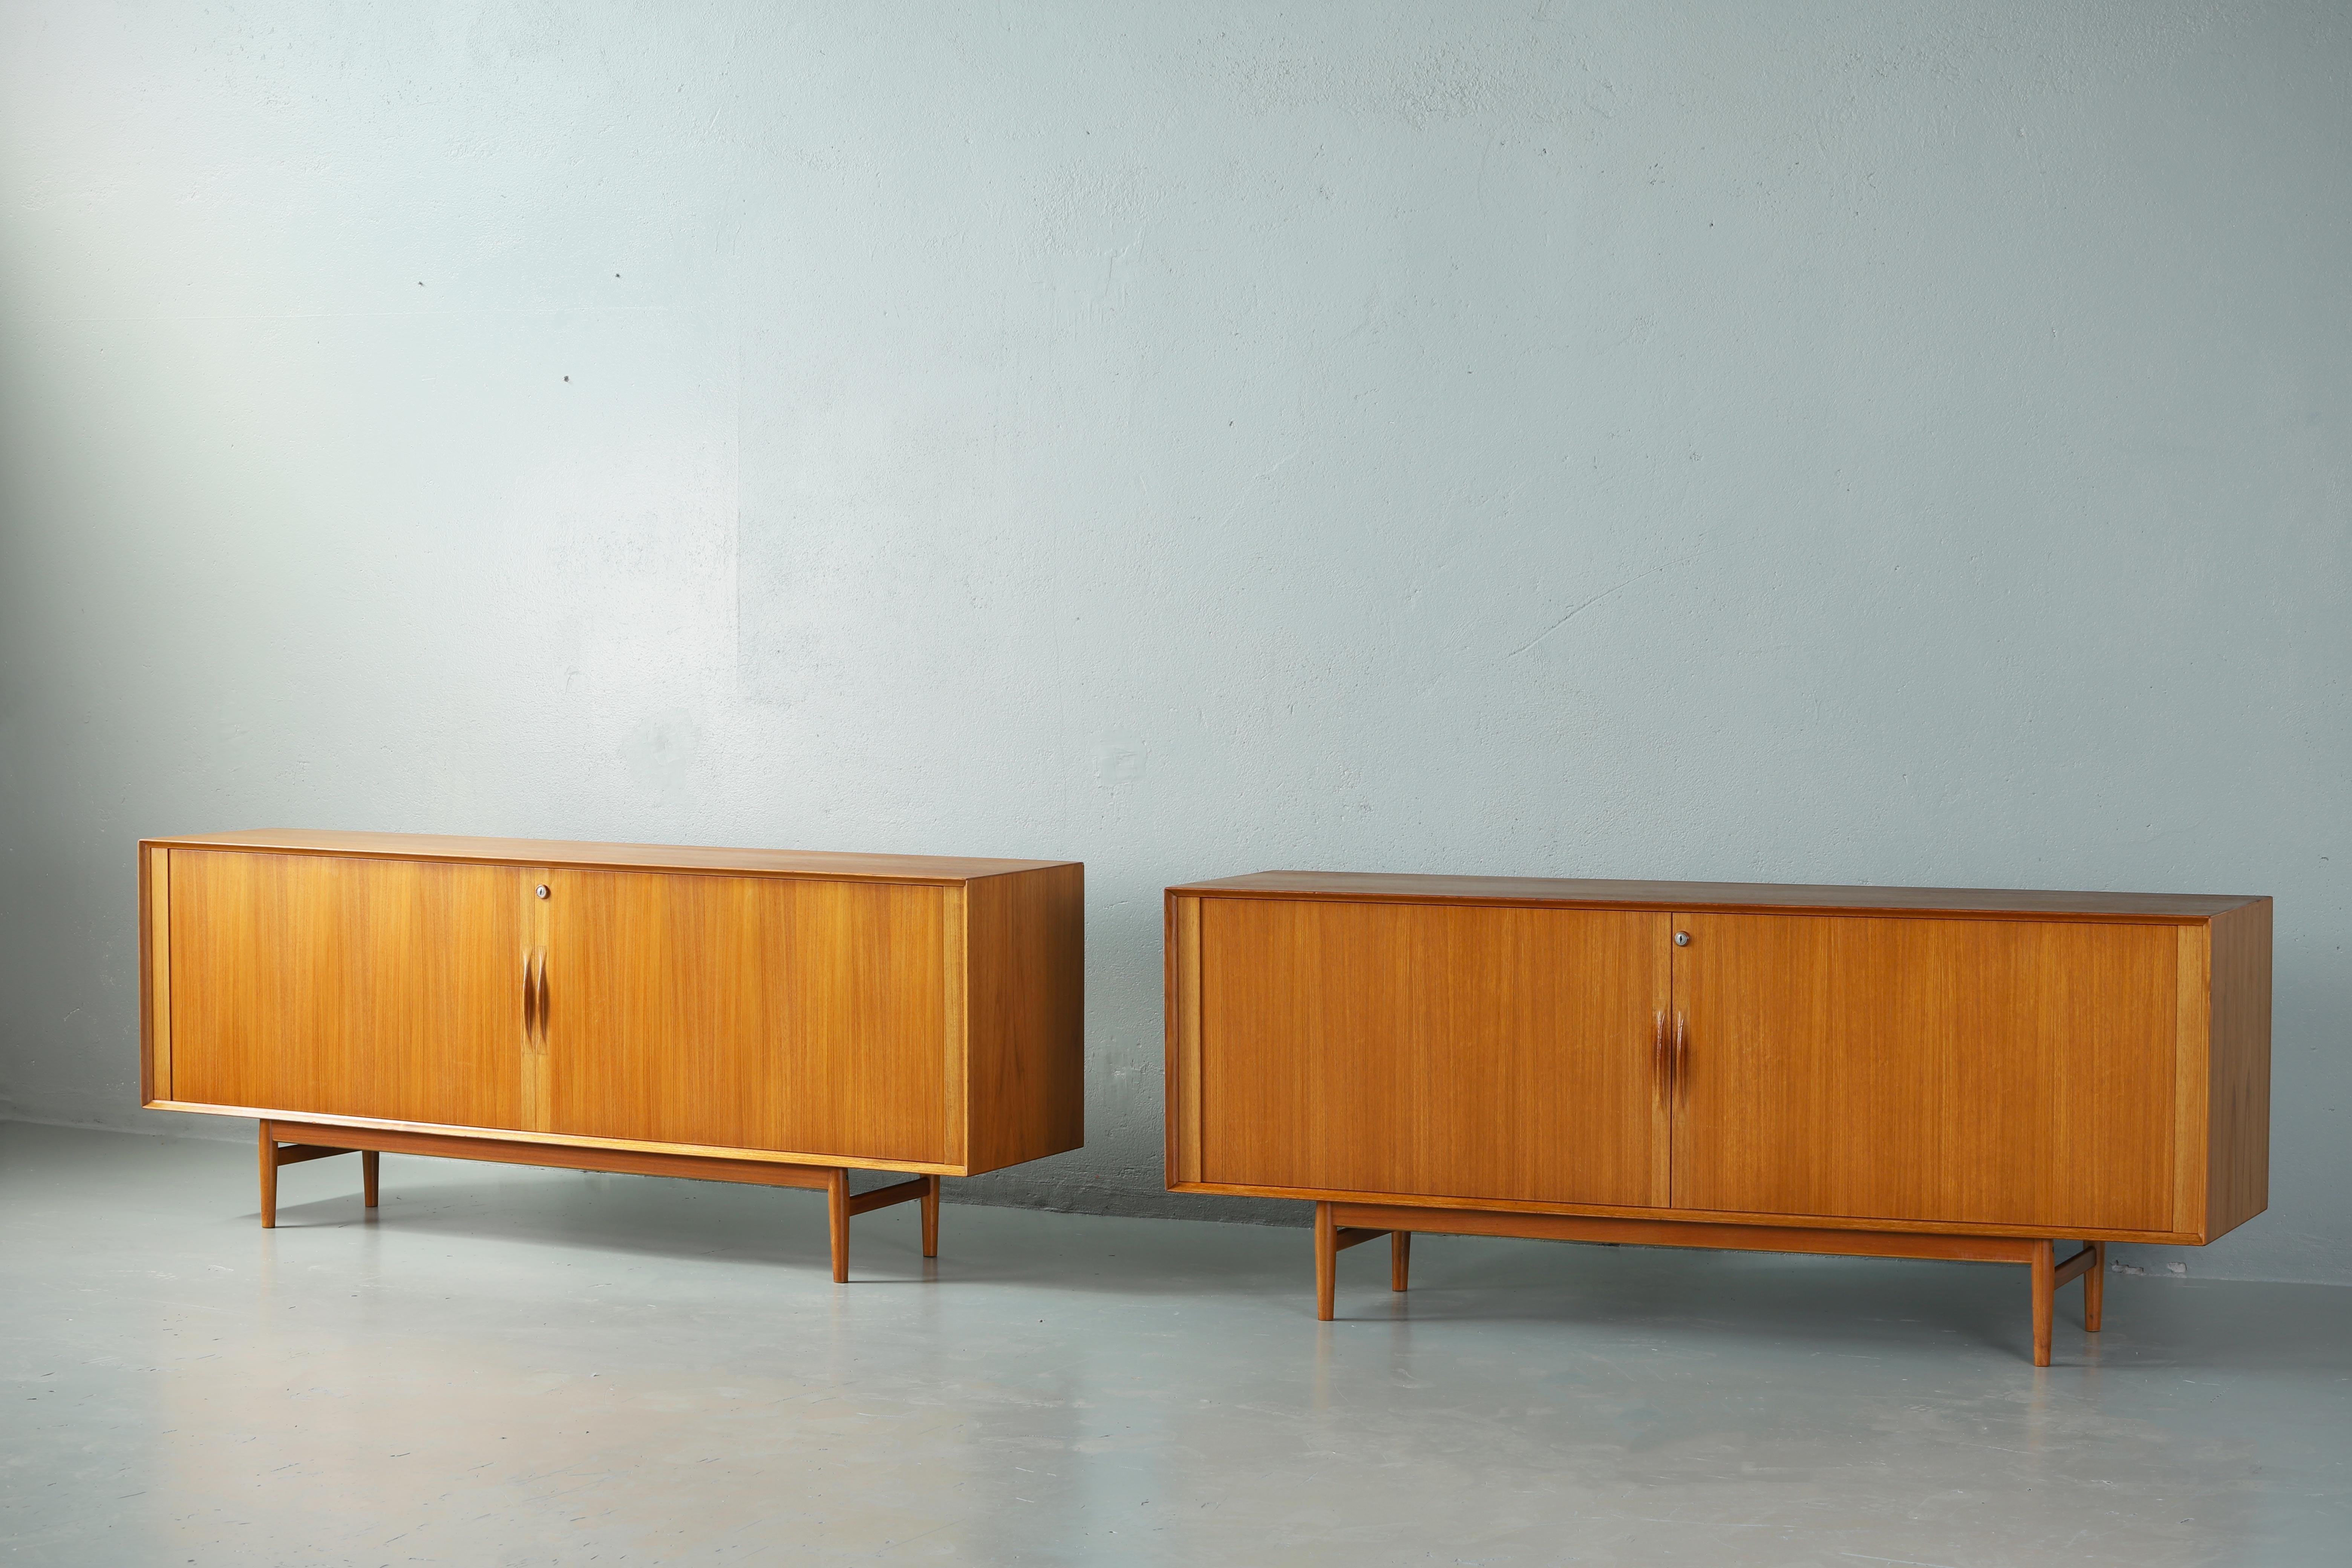 Two OS 37 sideboard ('Triennale' sideboard) designed by Arne Vodder (Denmark, 1926-2009) for Siblast, circa 1959.
This sideboard features perfect proportions and recognizable love of detail, high quality workmanship using first class